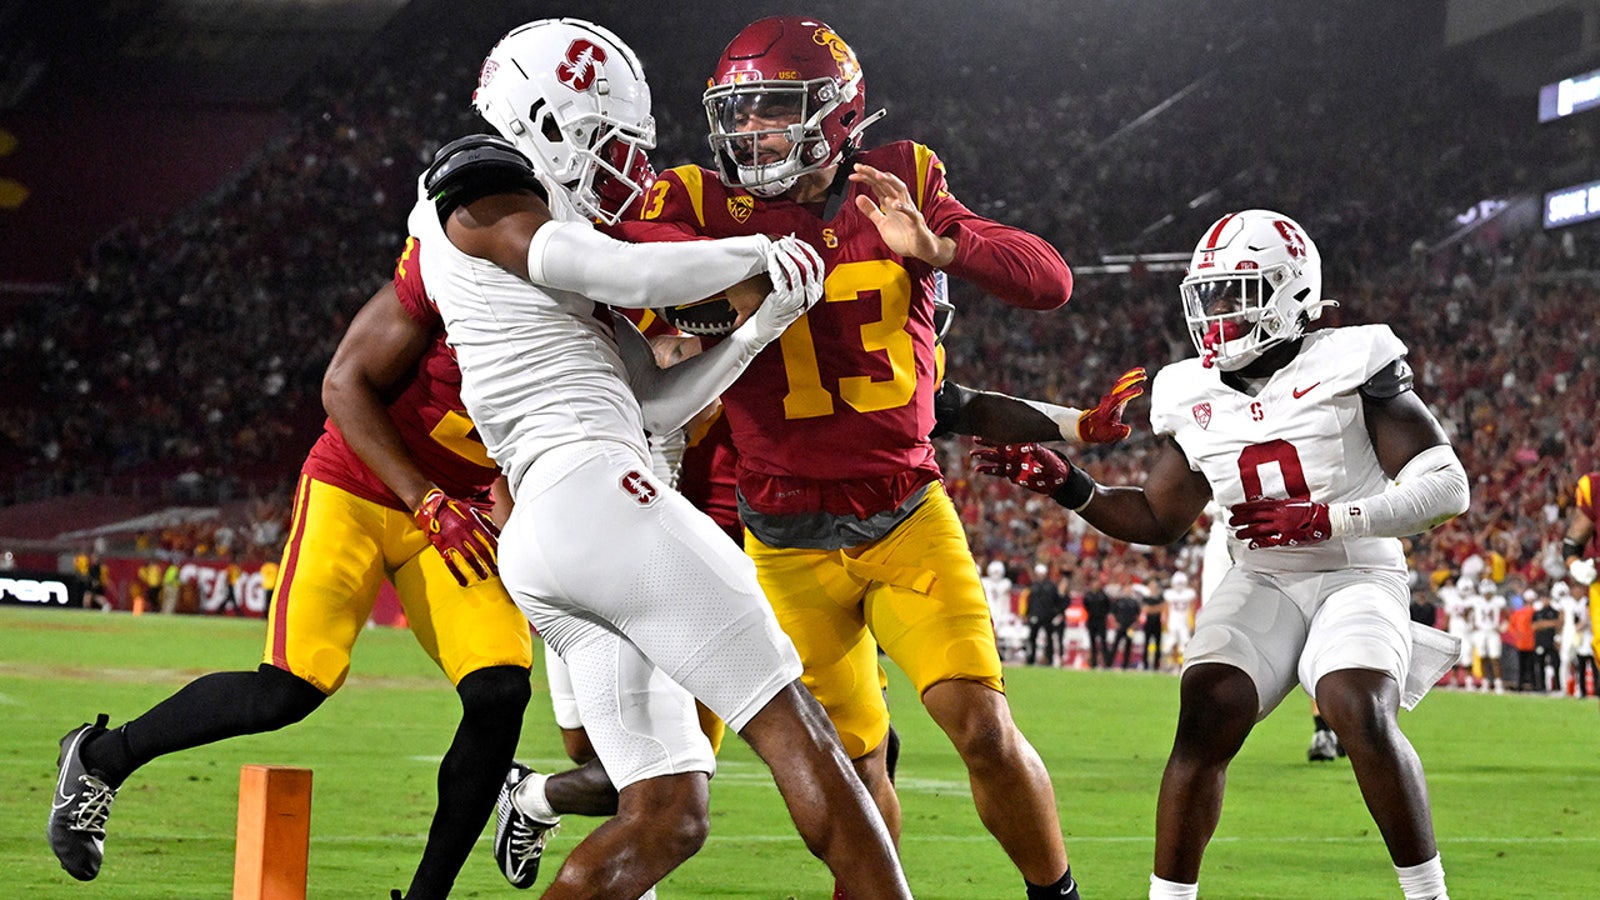 Highlights: USC cruises past Stanford